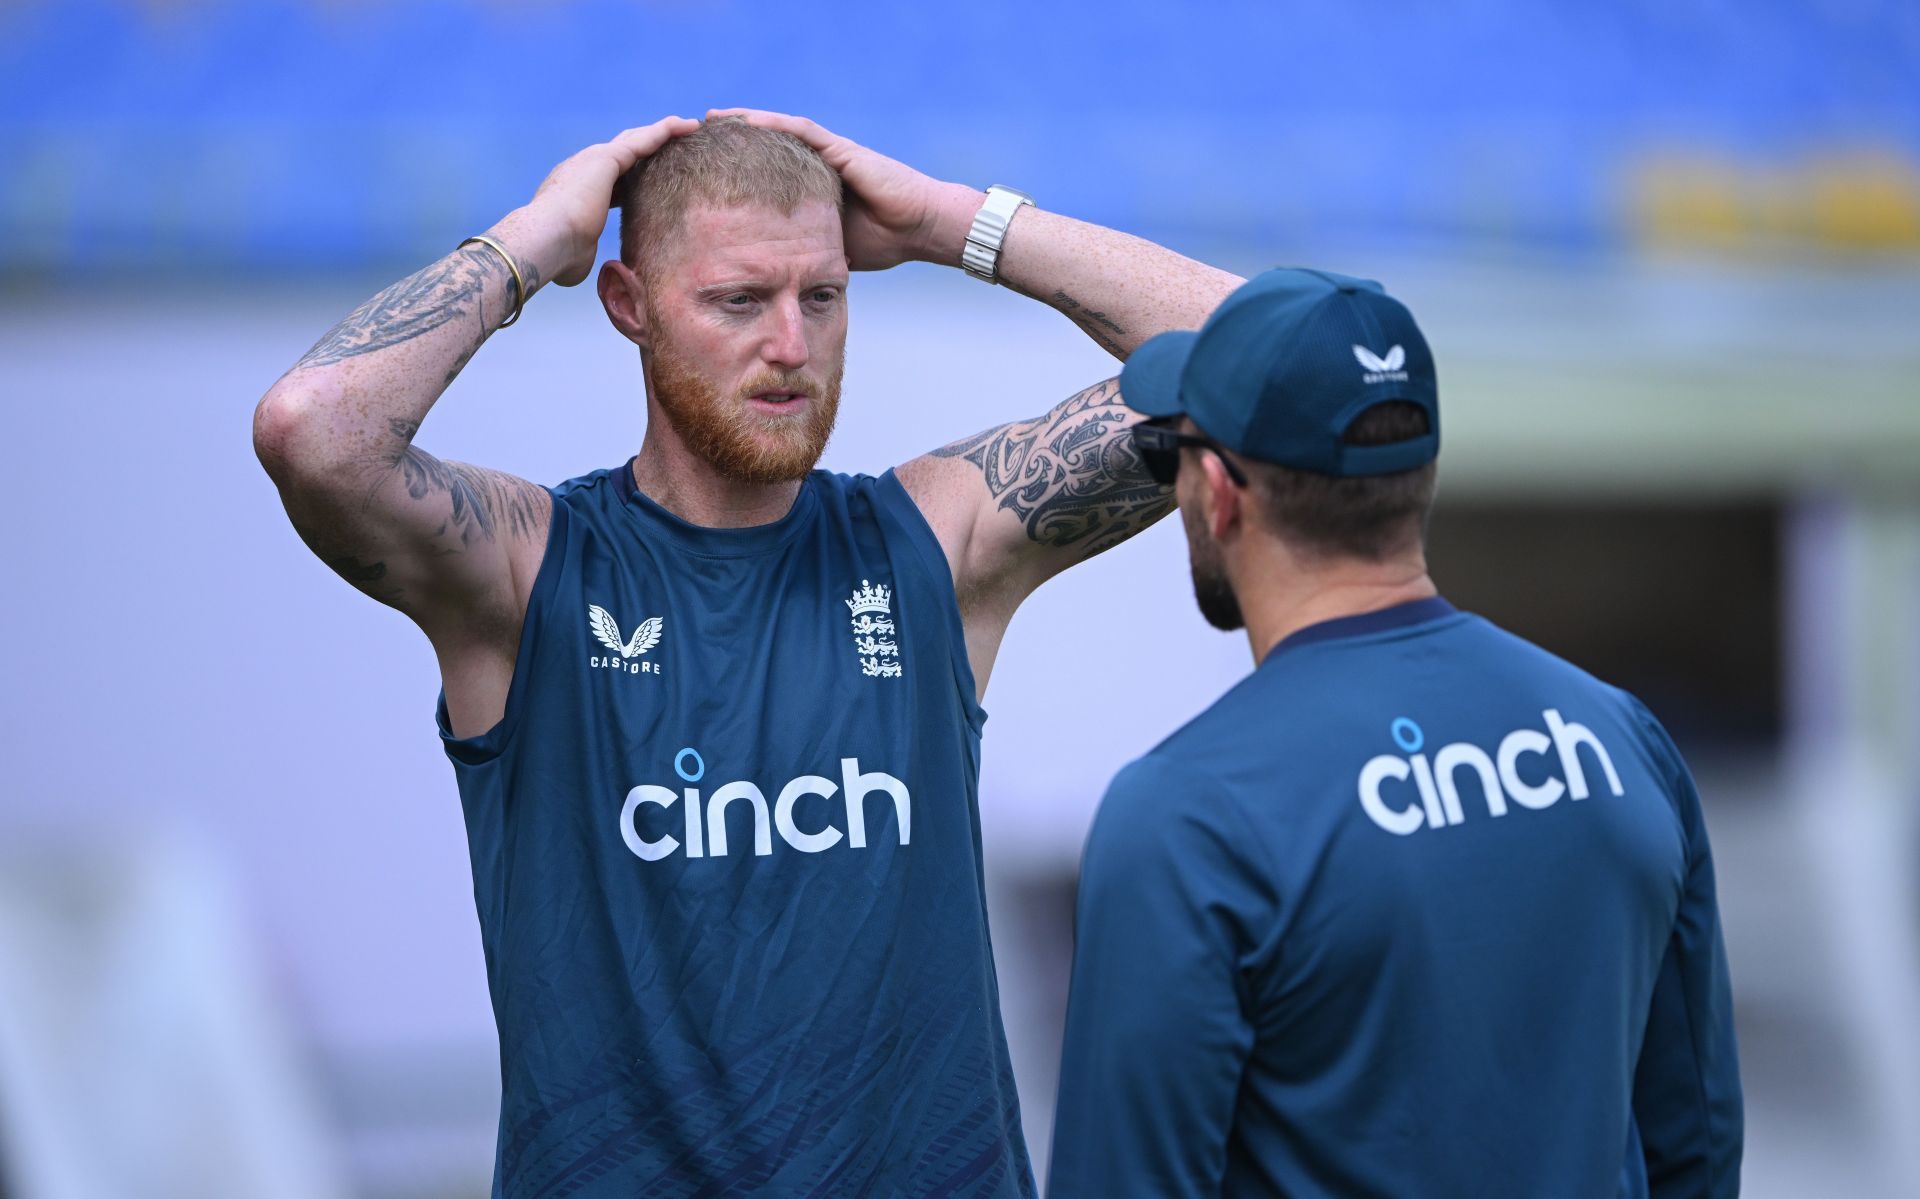 England practice session. (Image Credits: Getty)